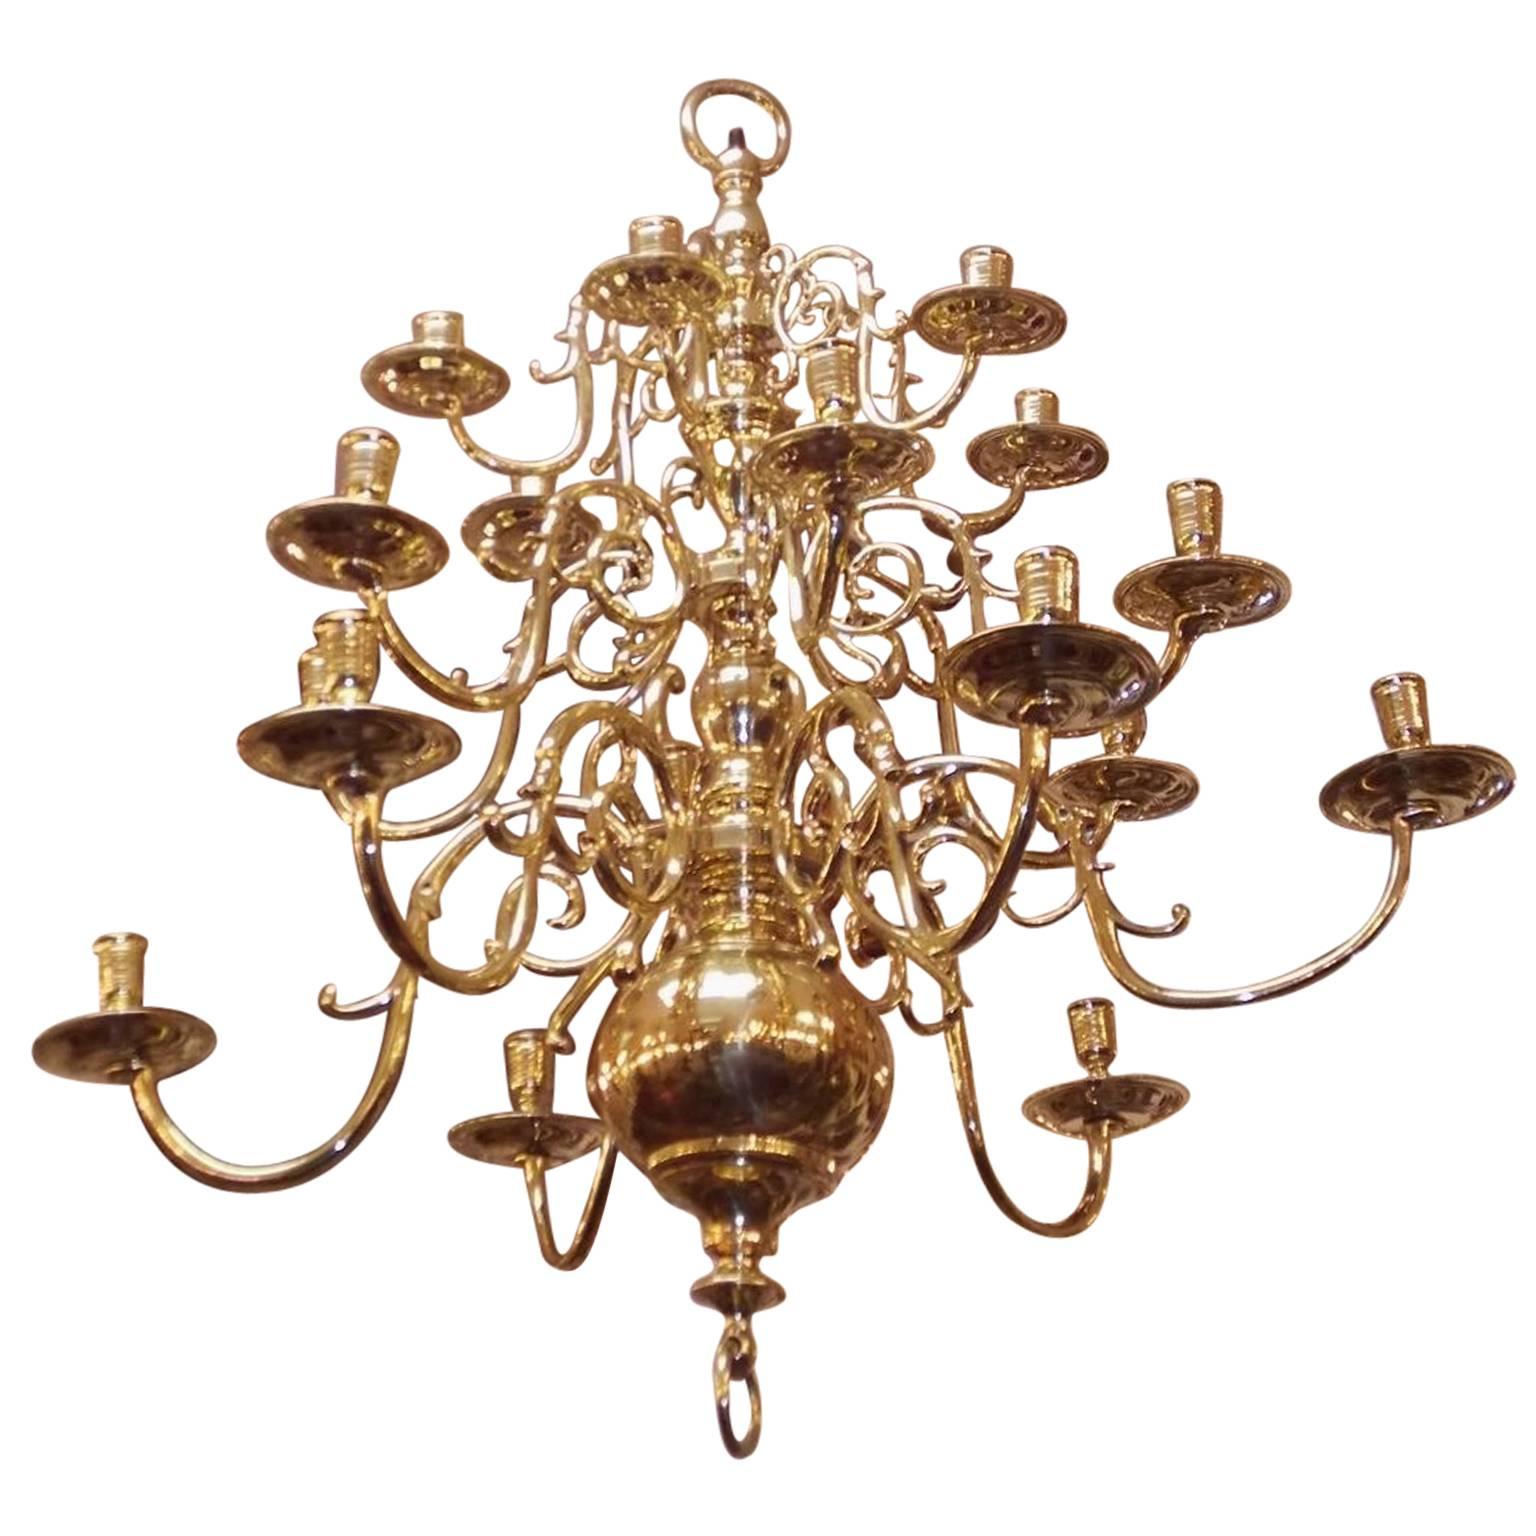 Dutch Colonial Brass Three-Tier Bulbous and Scrolled Chandelier, Circa 1760